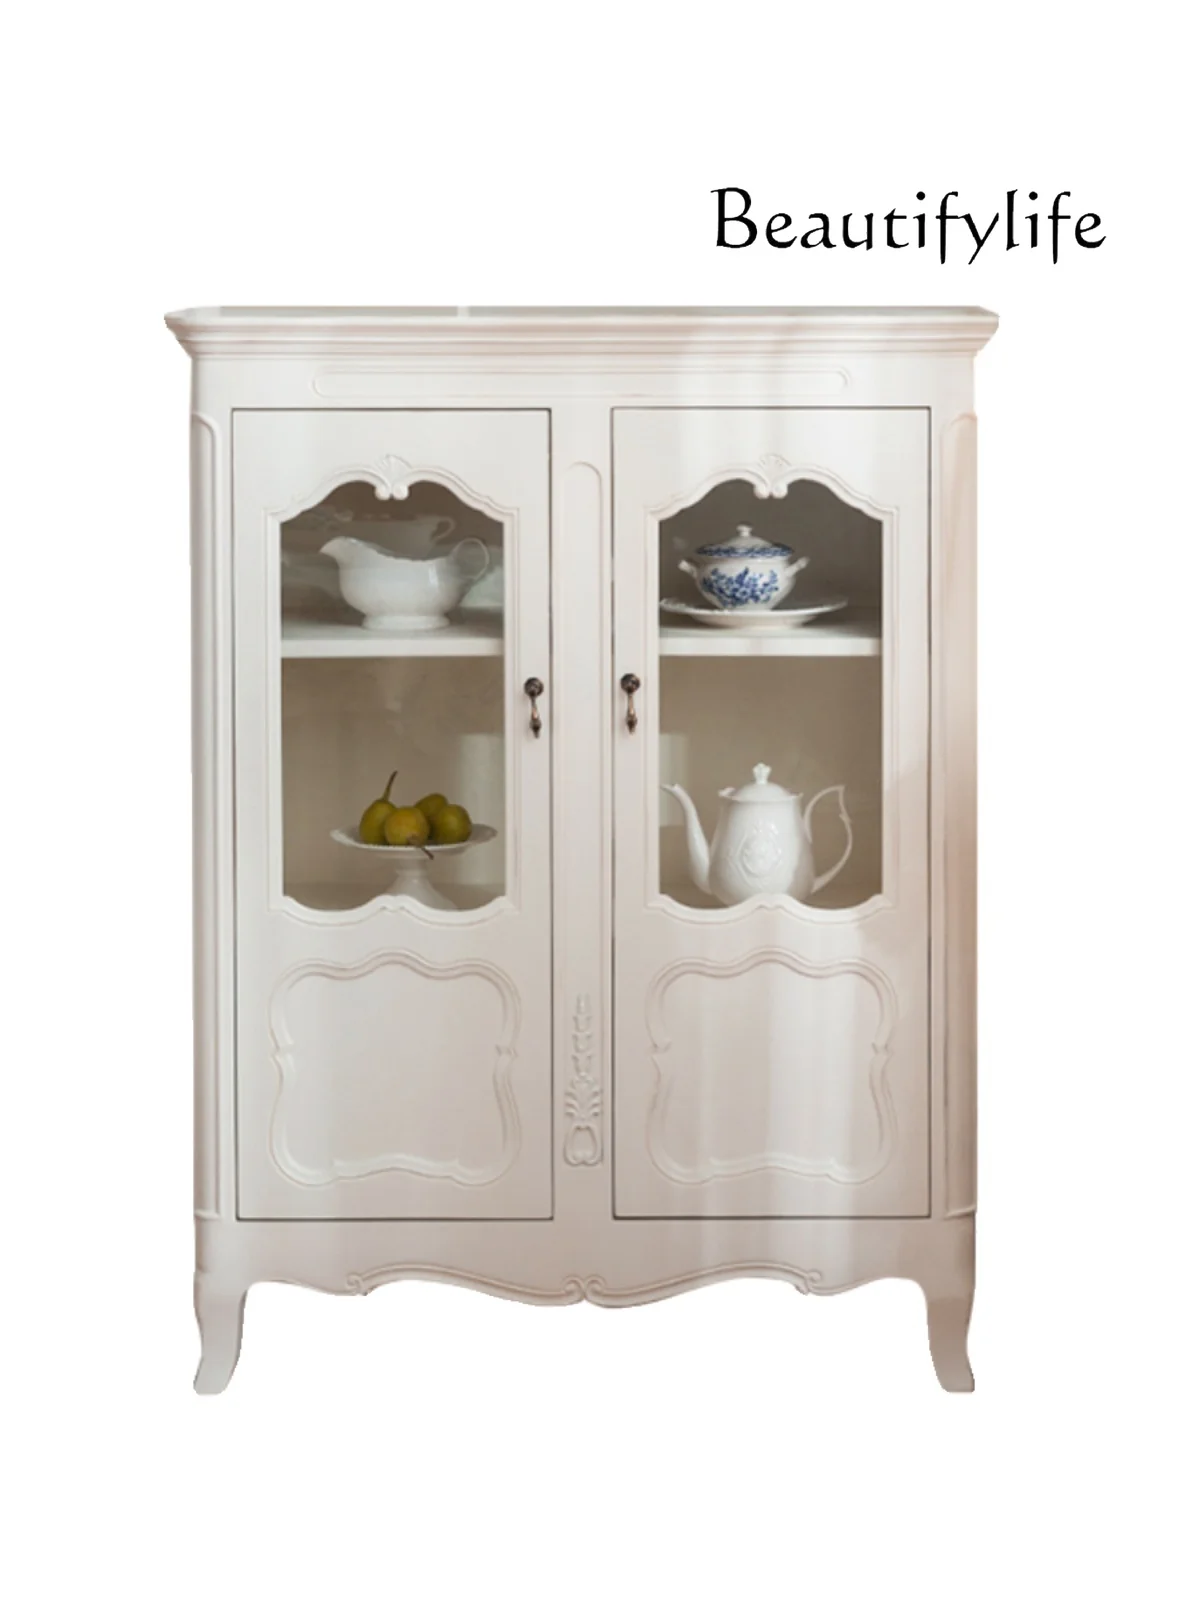 

French Entry Lux Style Kitchen Dining Side Locker Living Room Entrance Cabinet Study Storage Wine Cabinet